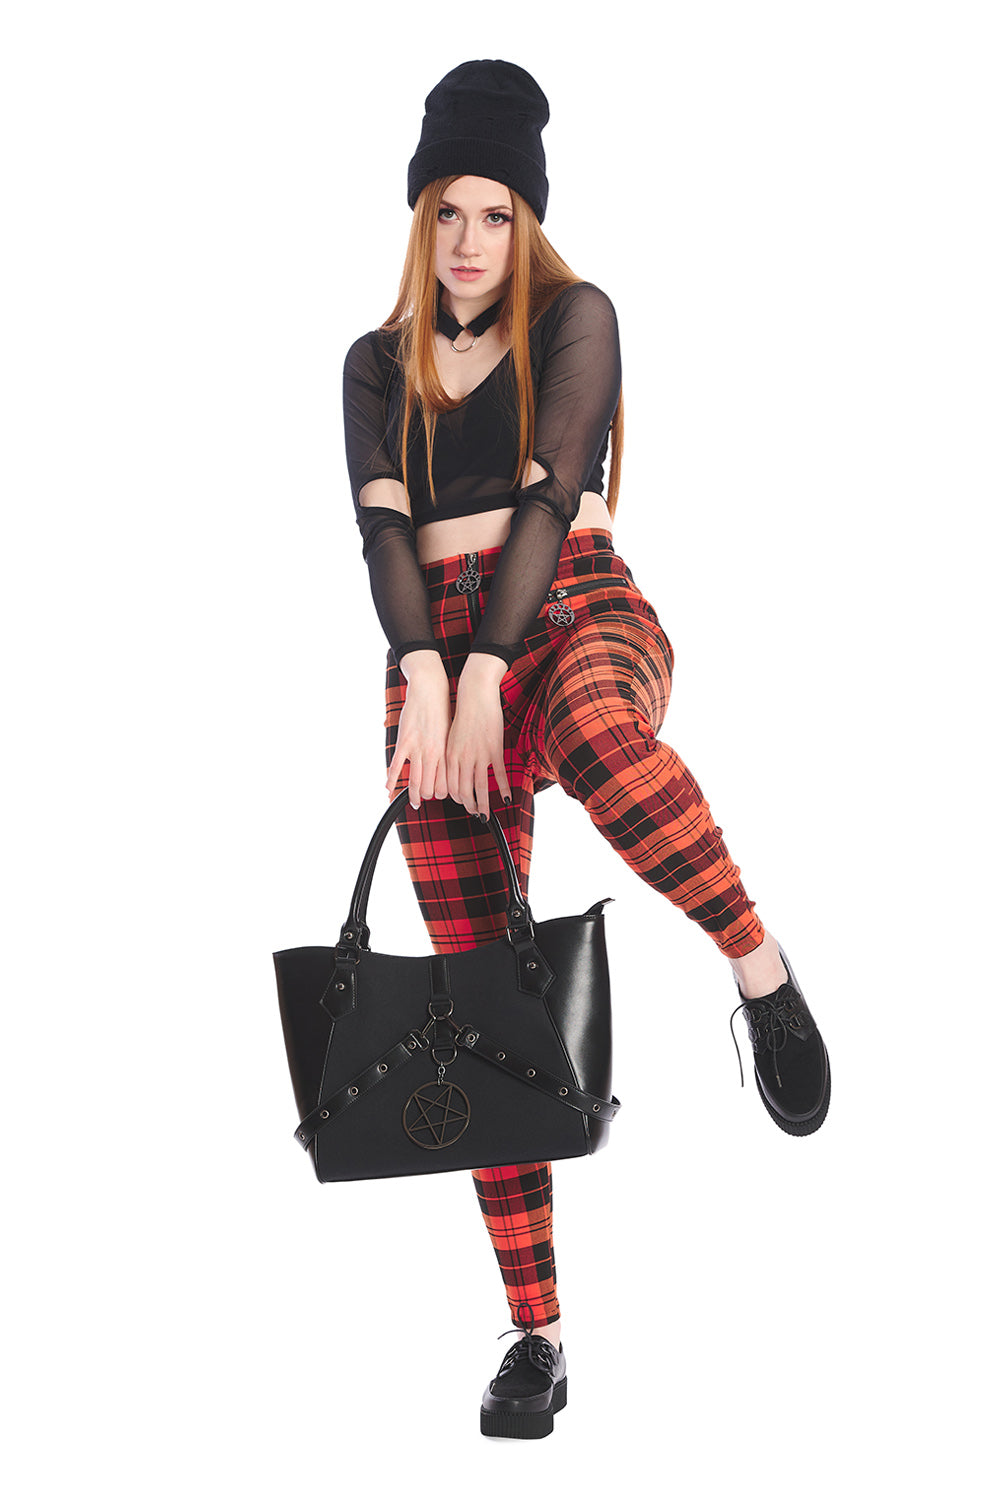 Model wears orange tartan high waisted trousers with a crop mesh top in black and beanie hat holding oversized handbag in black